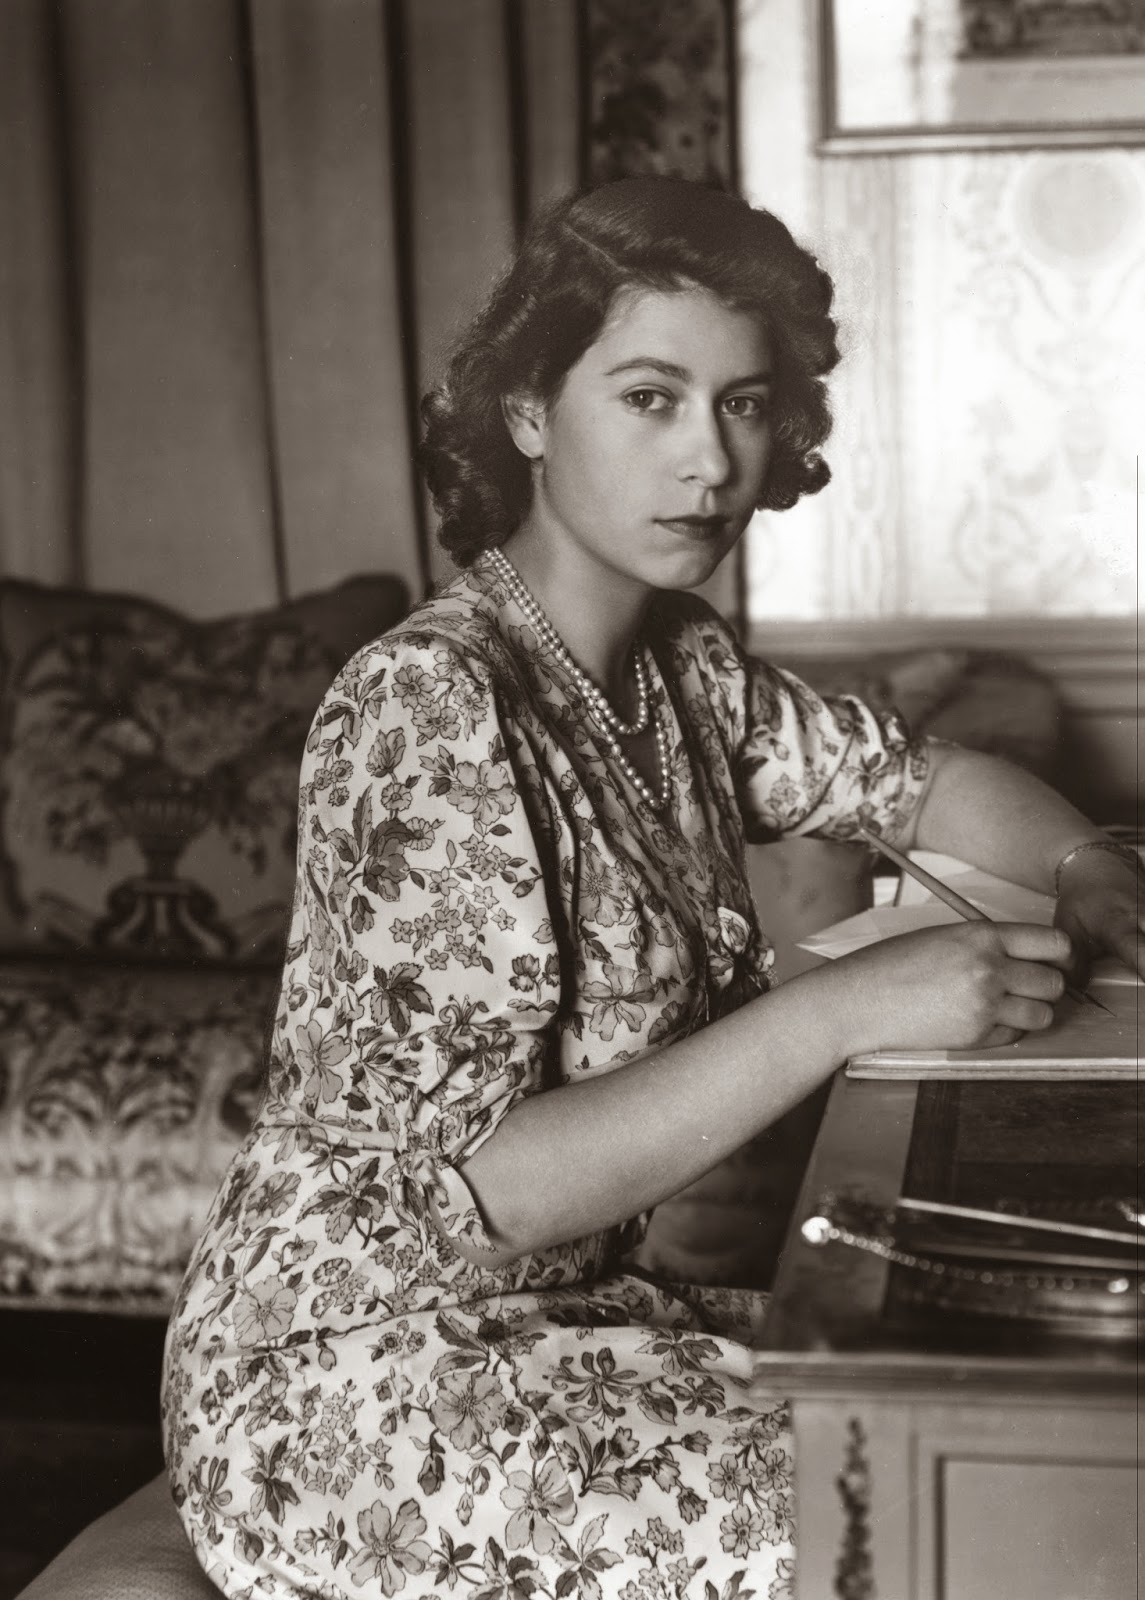 Queen (then Princess) Elizabeth, photographed while writing at her desk 

in 1944.